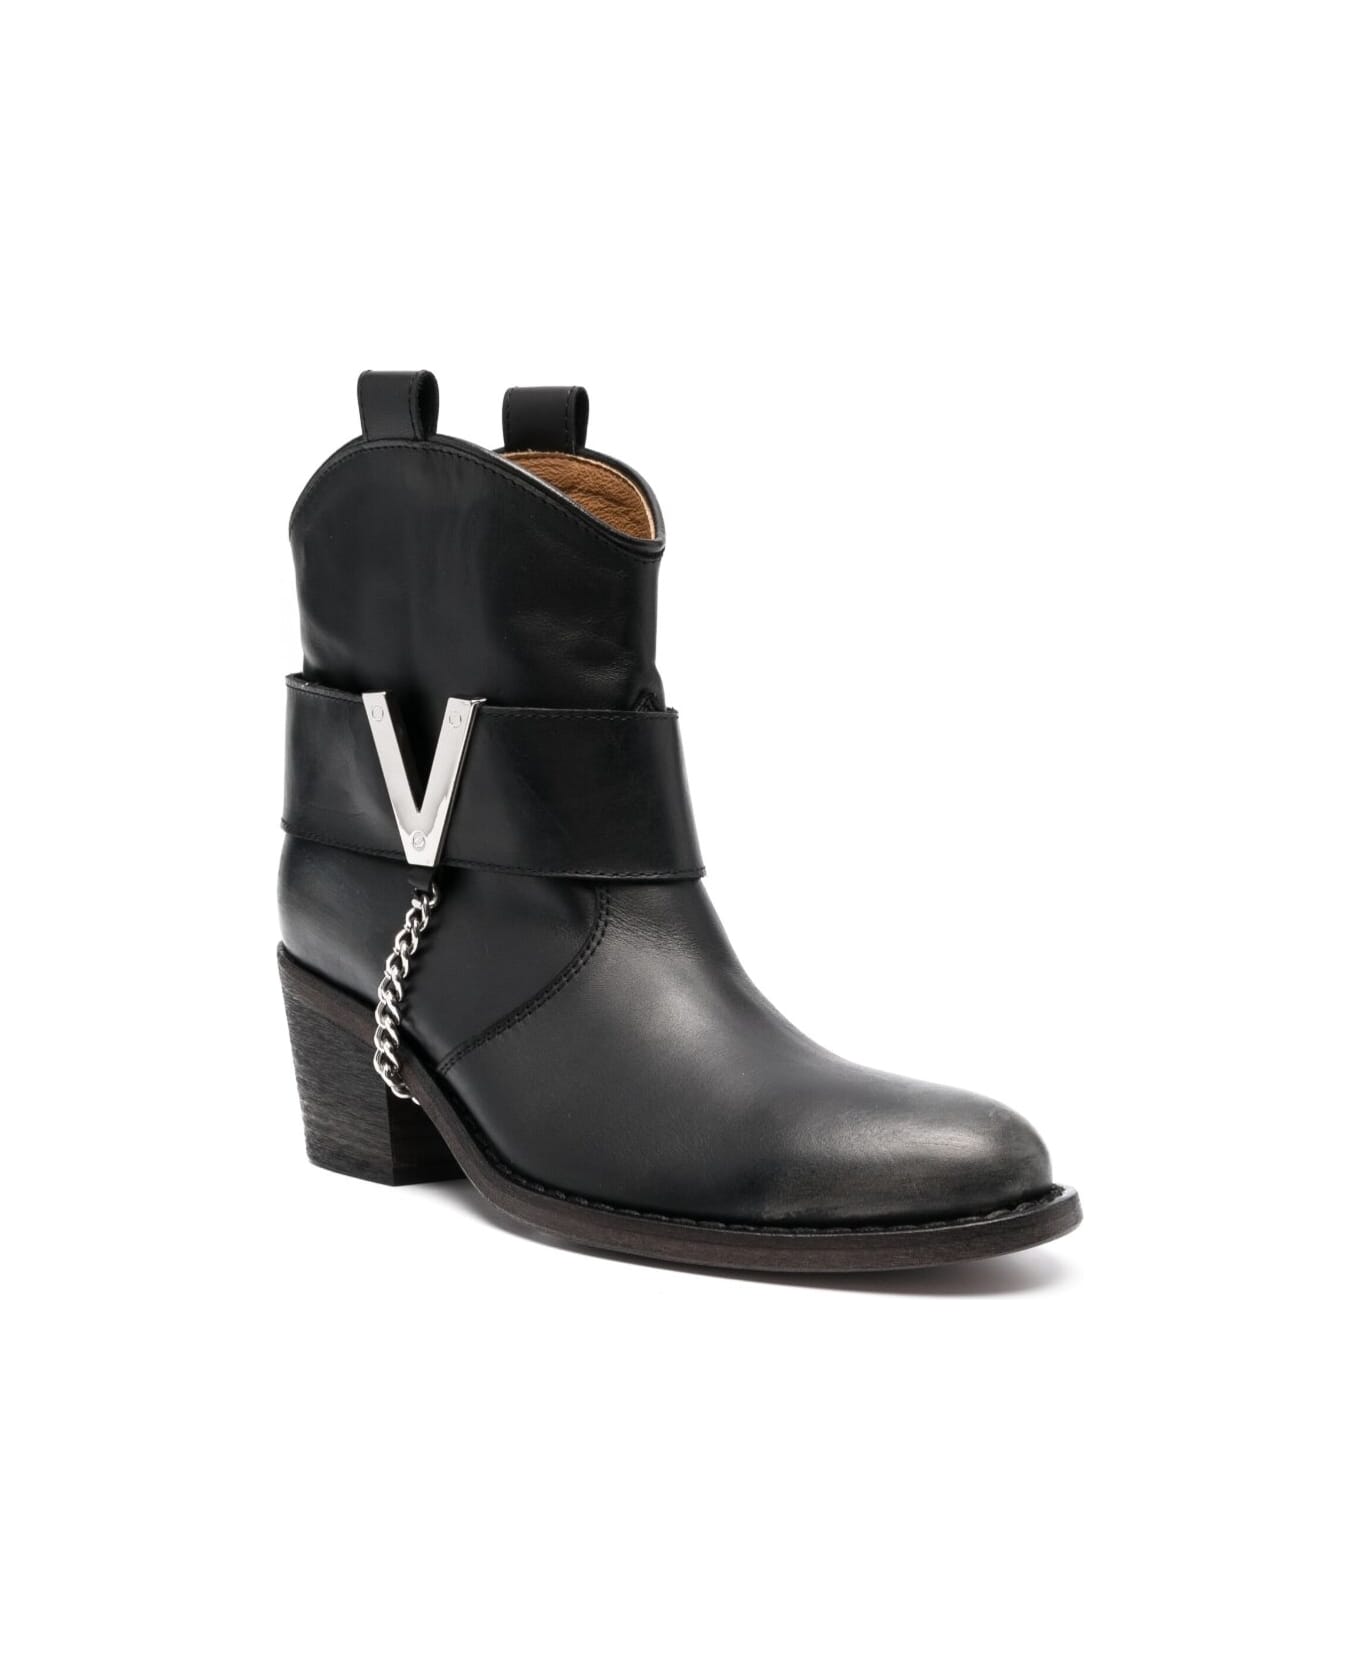 Via Roma 15 Texan Ankle Boots In Black Leather Woman - Black ブーツ